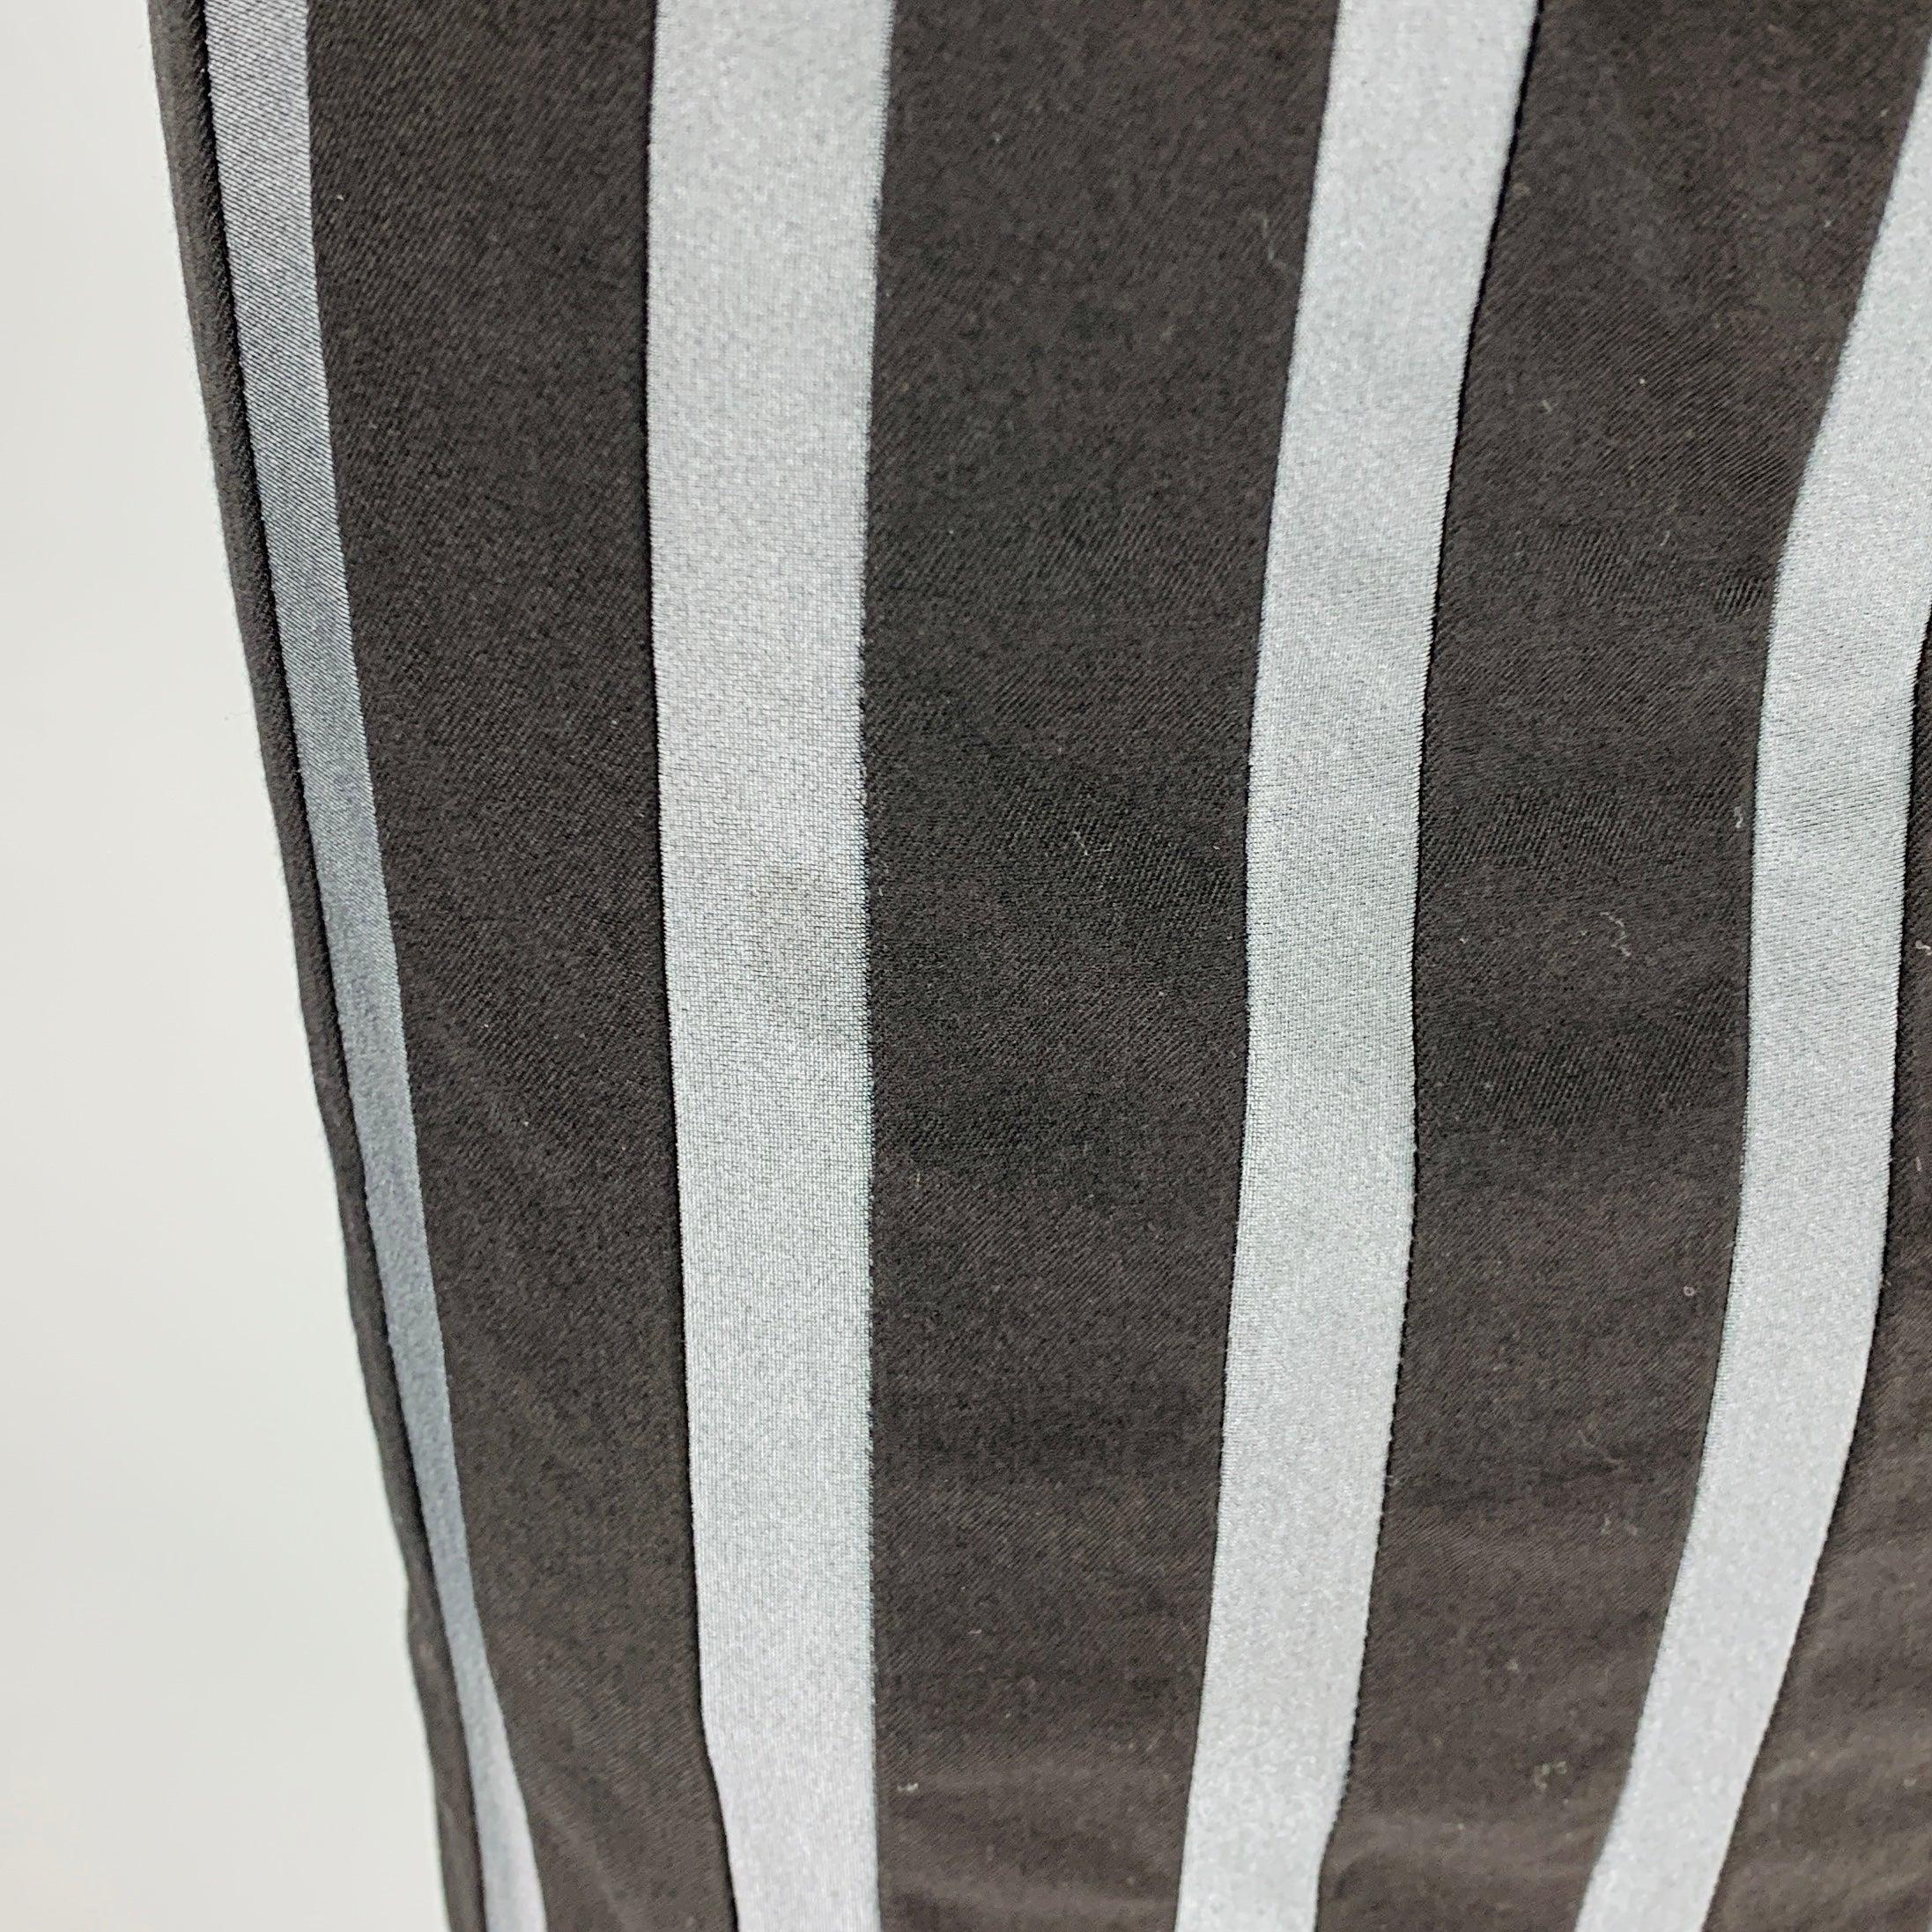 JEAN PAUL GAULTIER Size 4 Black Grey Stripe Pencil Skirt In Good Condition For Sale In San Francisco, CA